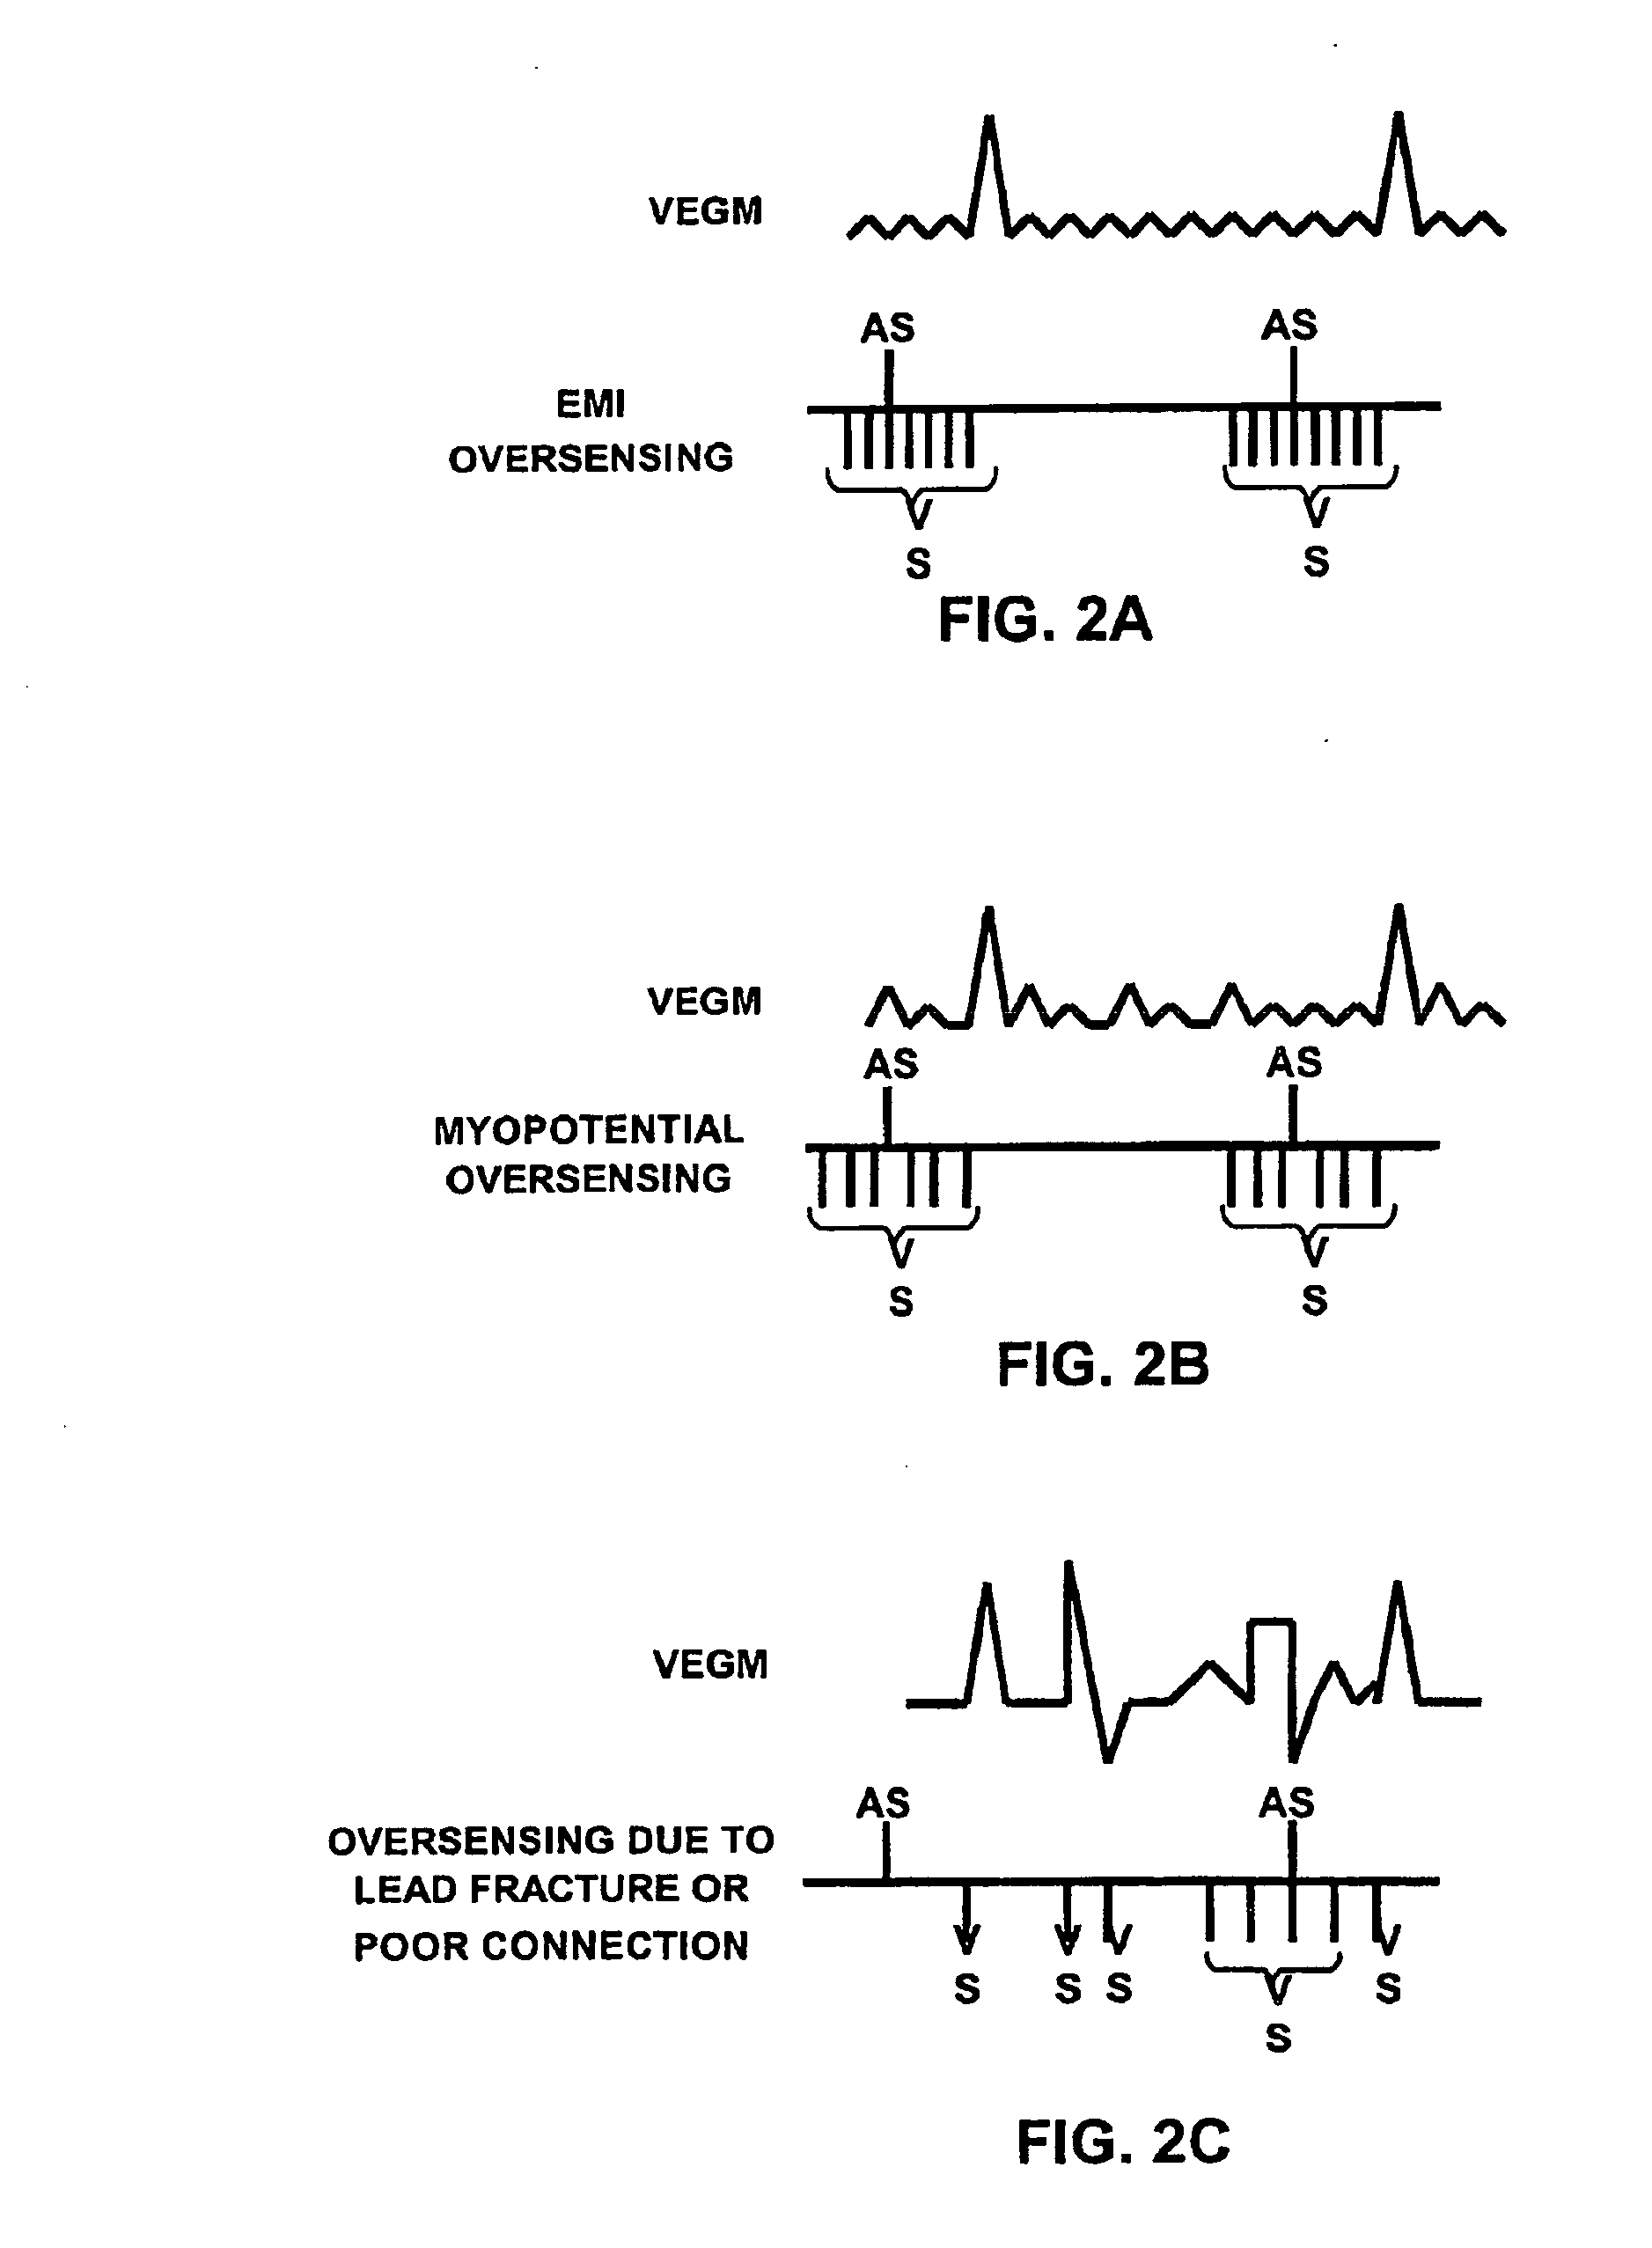 Method and apparatus for identifying oversensing using far-field intracardiac electrograms and marker channels